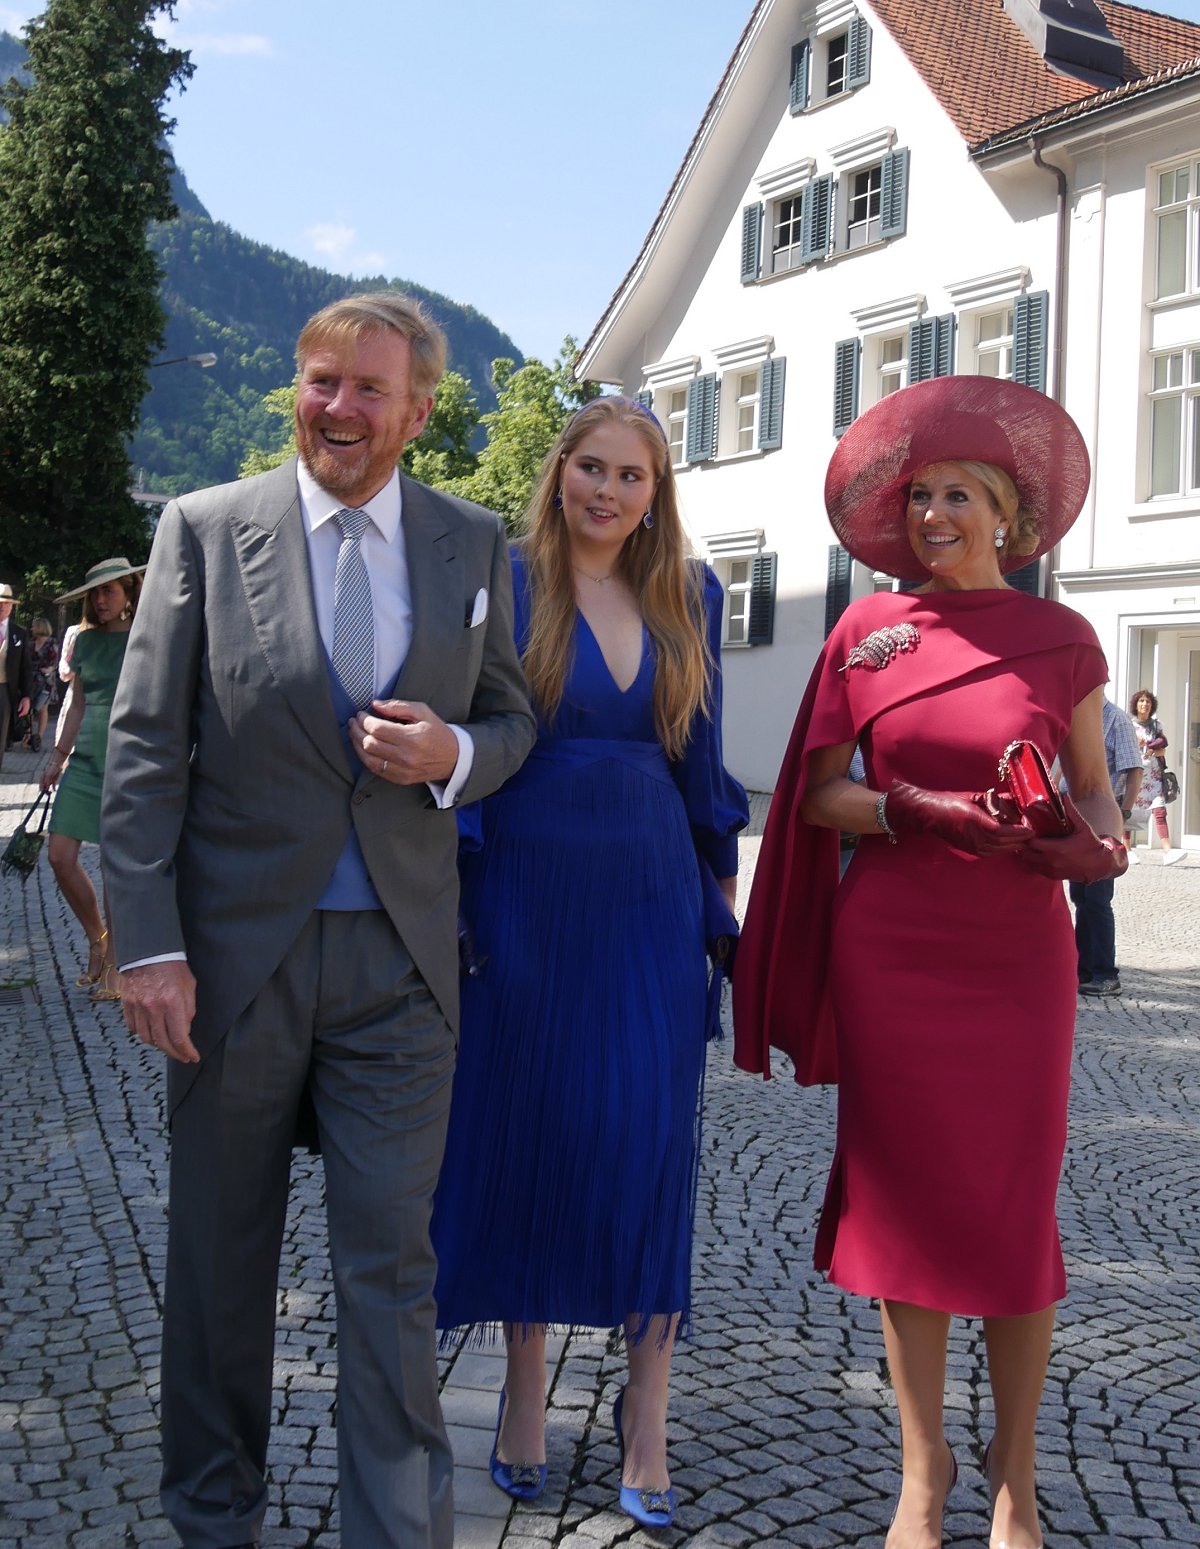 The King and Queen of the Netherlands, with the Princess of Orange, attend the wedding of Count Caspar von Matuschka and Countess Leonie von Waldburg-Zeil in Hohenems, Austria, on June 22, 2024 (Photograph © Stefan. Do not reproduce.)